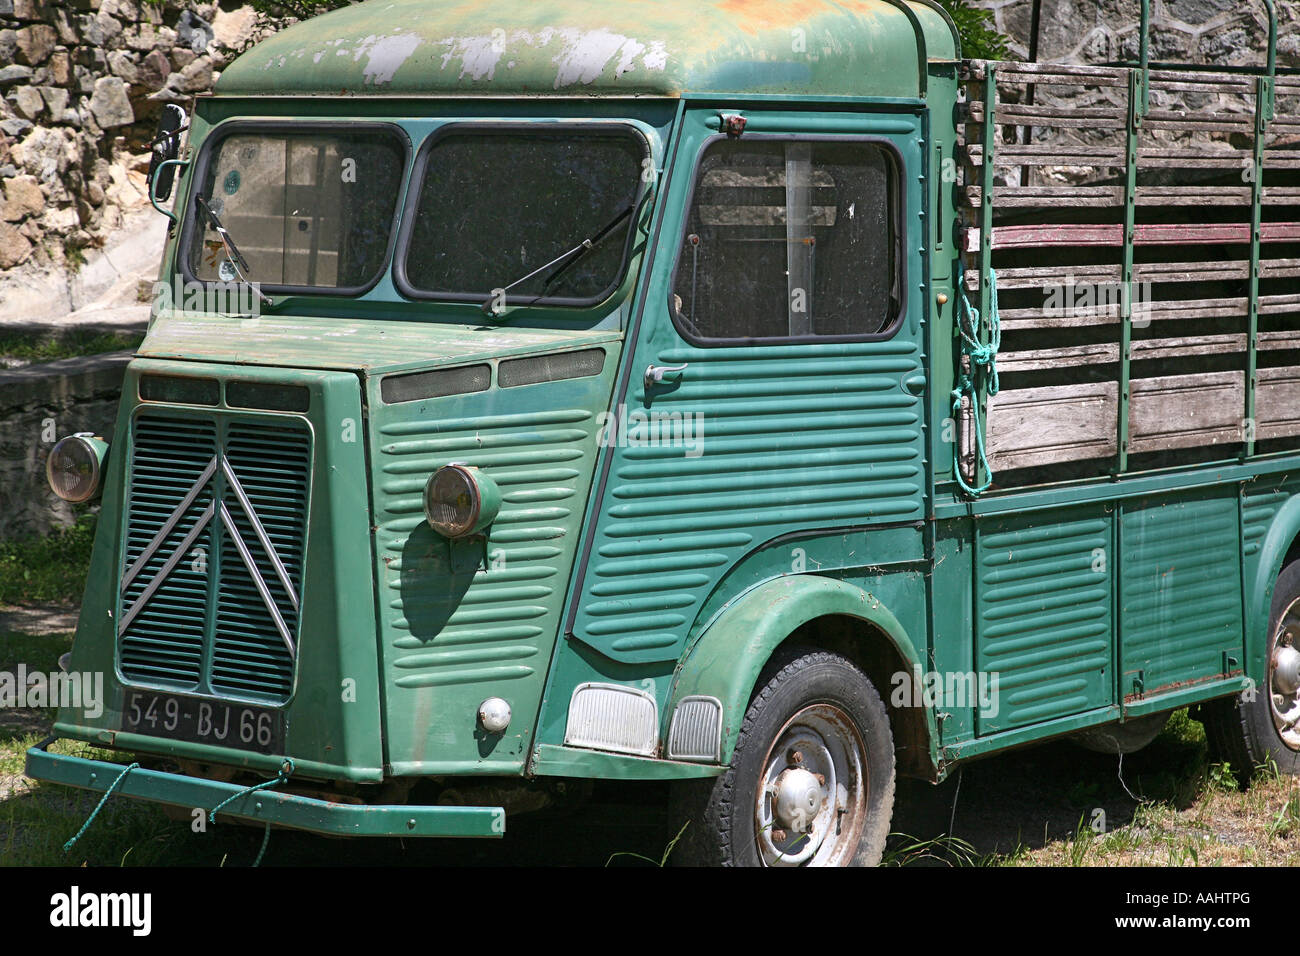 Citroen Truck High Resolution Stock Photography and Images - Alamy